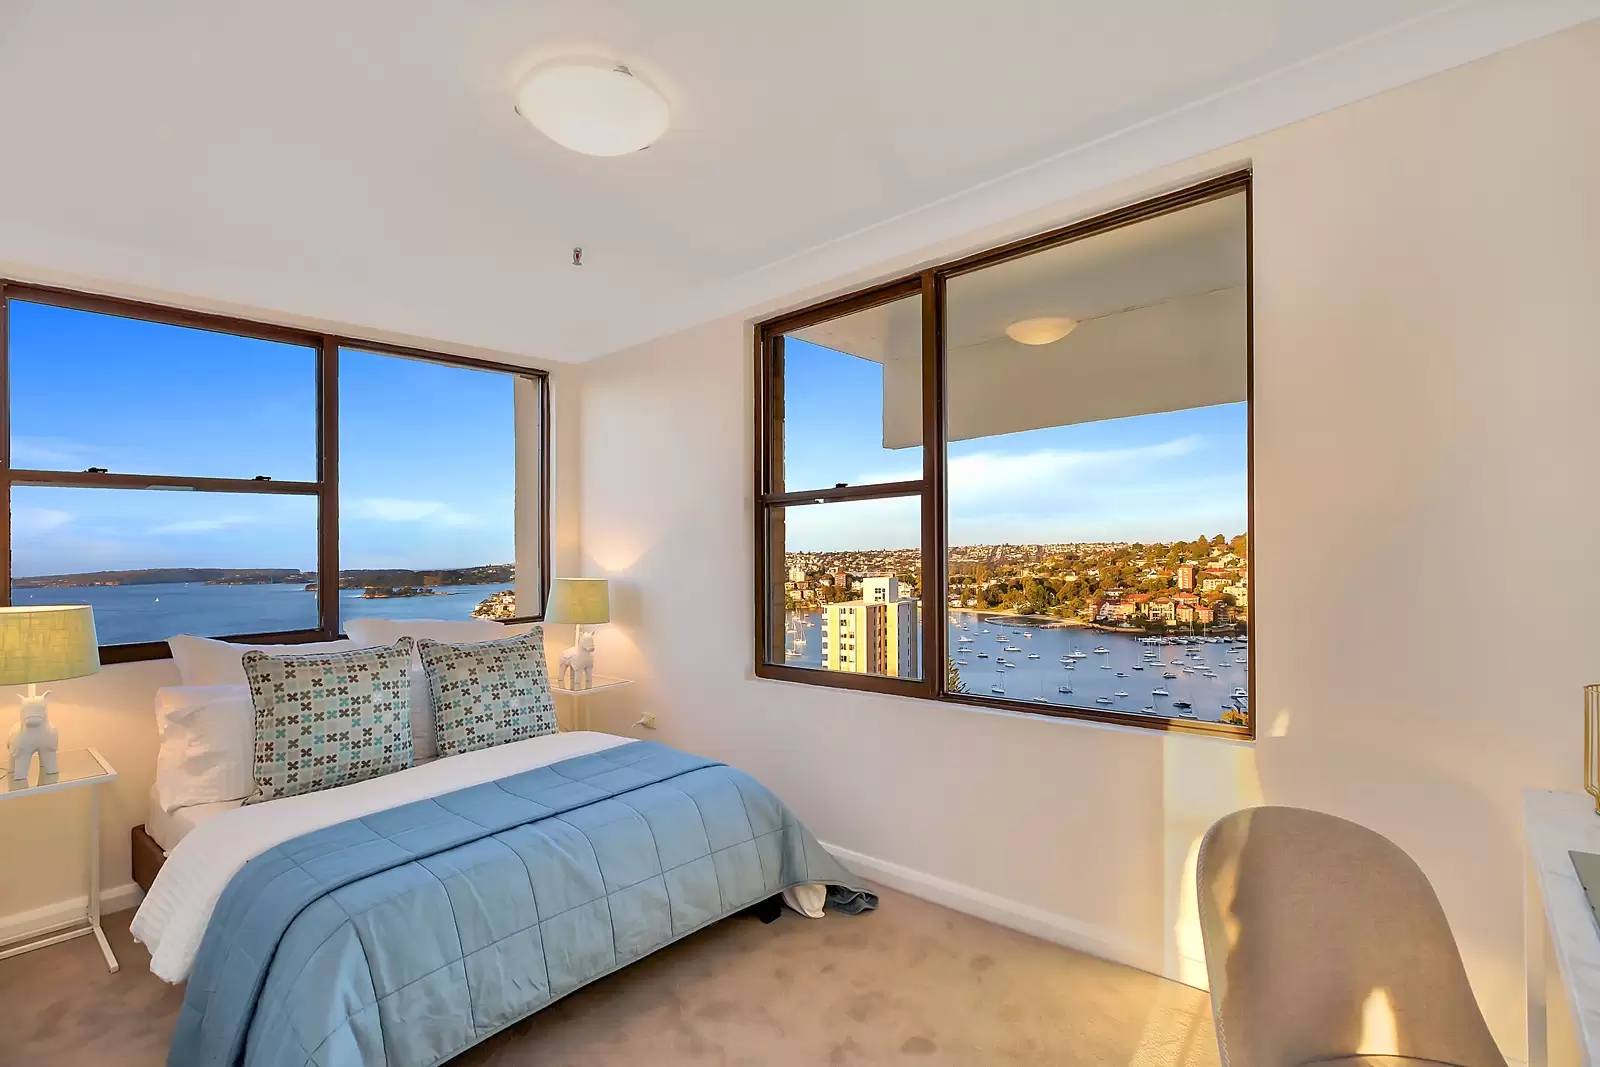 Photo #8: 32/60 Darling Point Road, Darling Point - Sold by Sydney Sotheby's International Realty